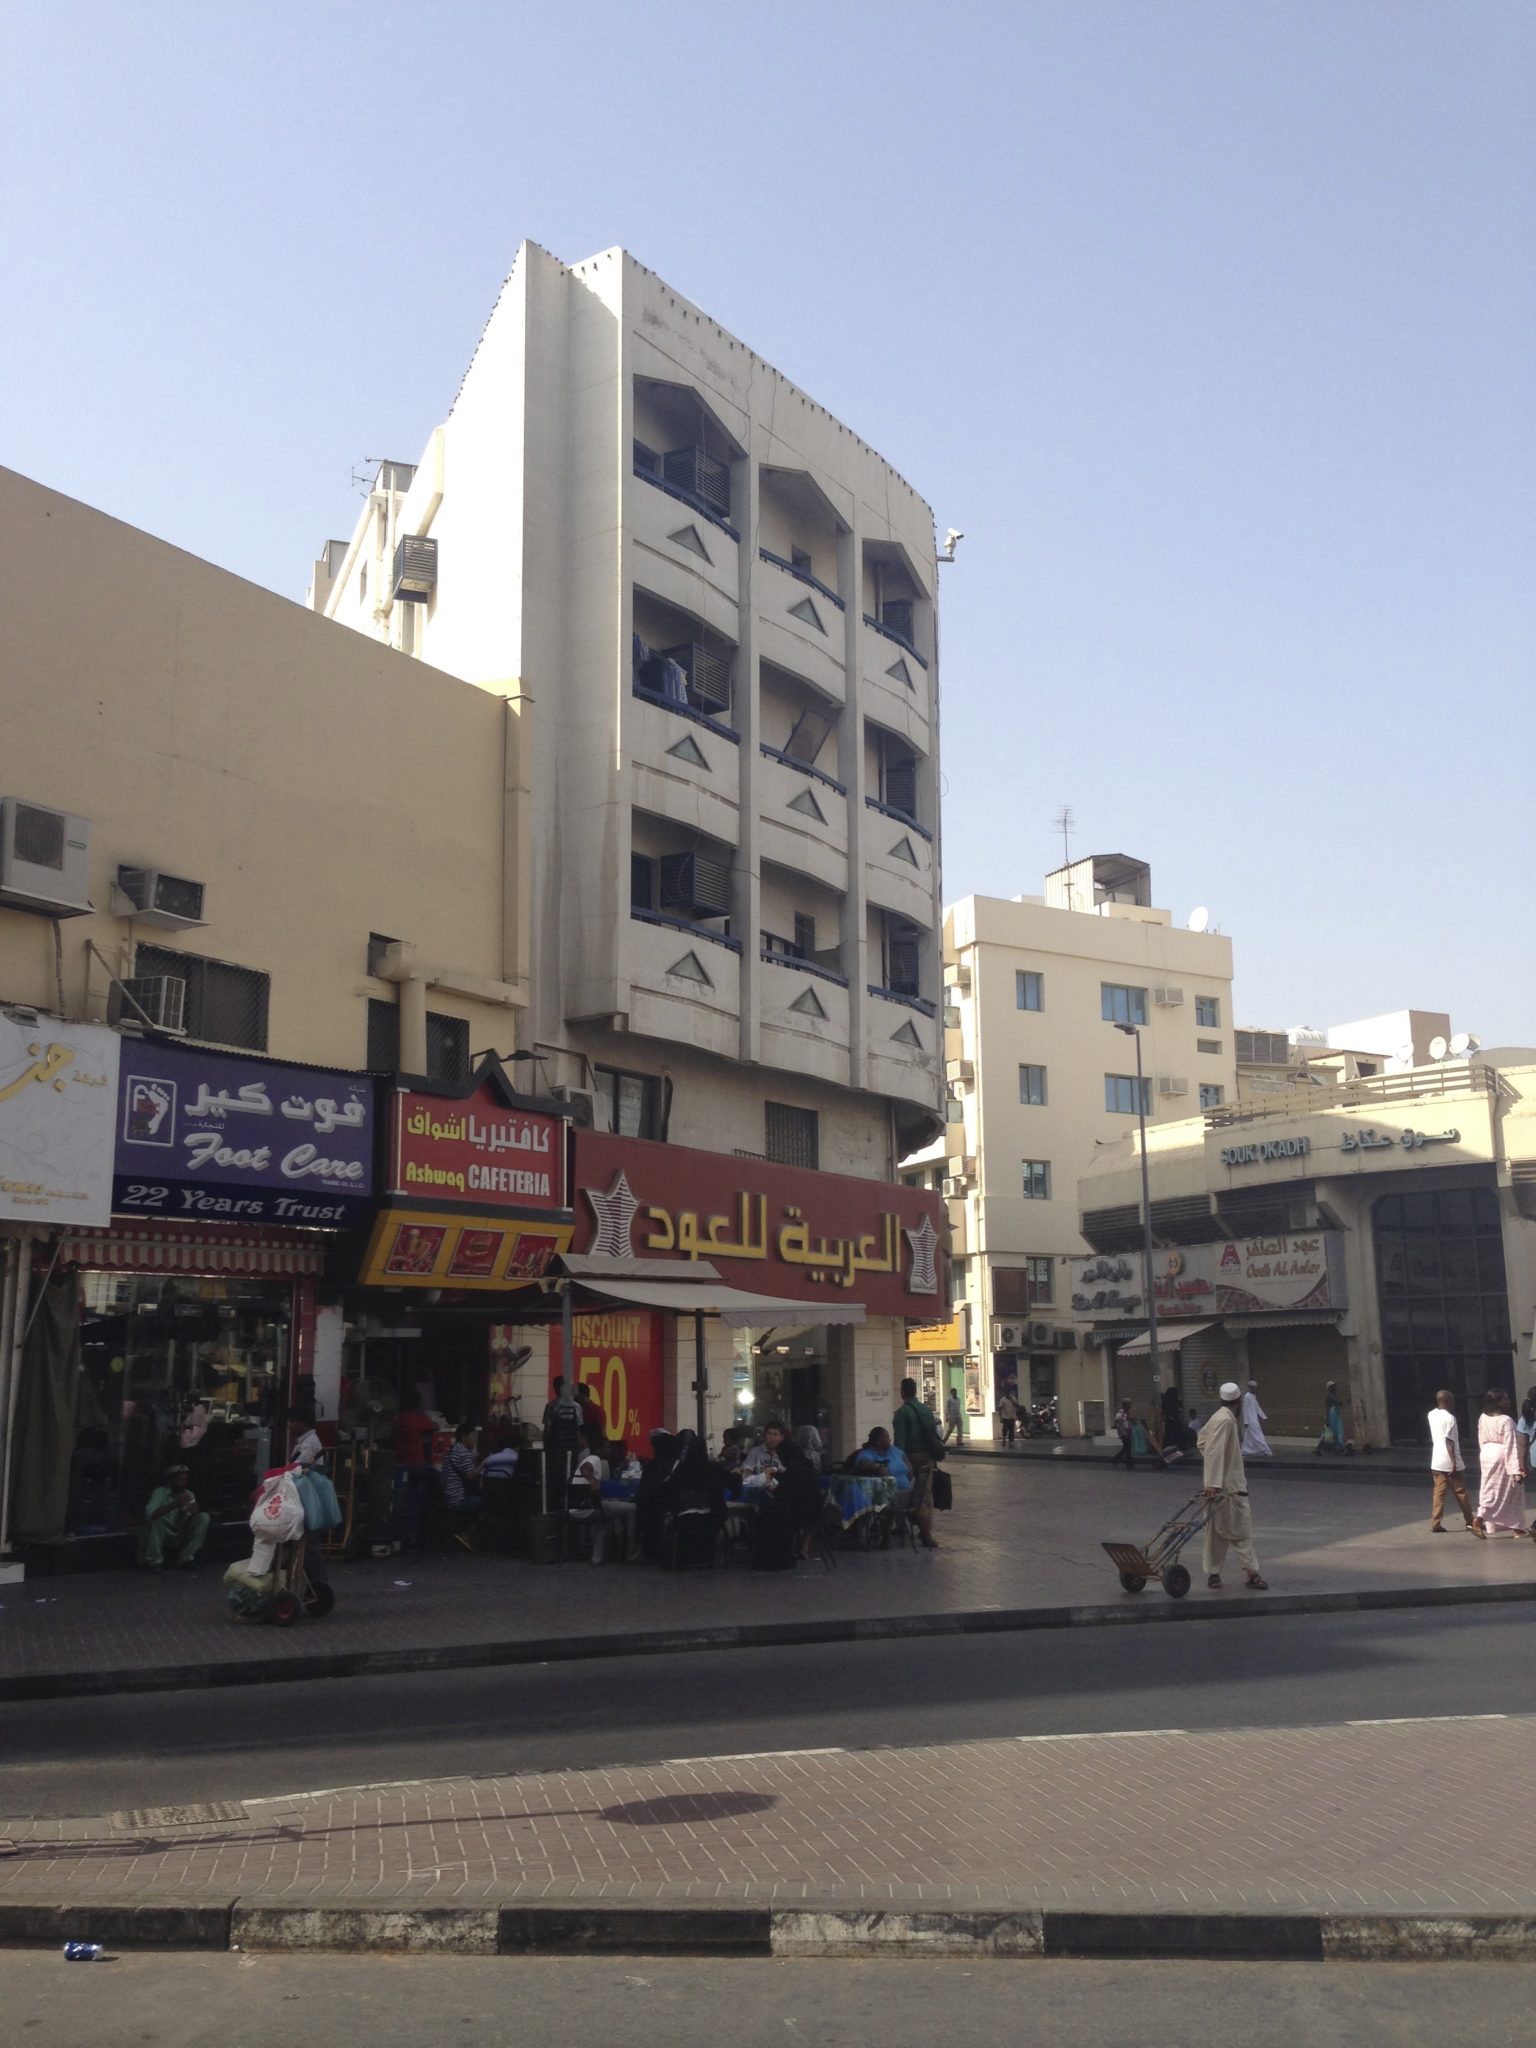 Deira; Dubai's old city. Not much seems to have changed here, although it's much quieter than I remember it being.